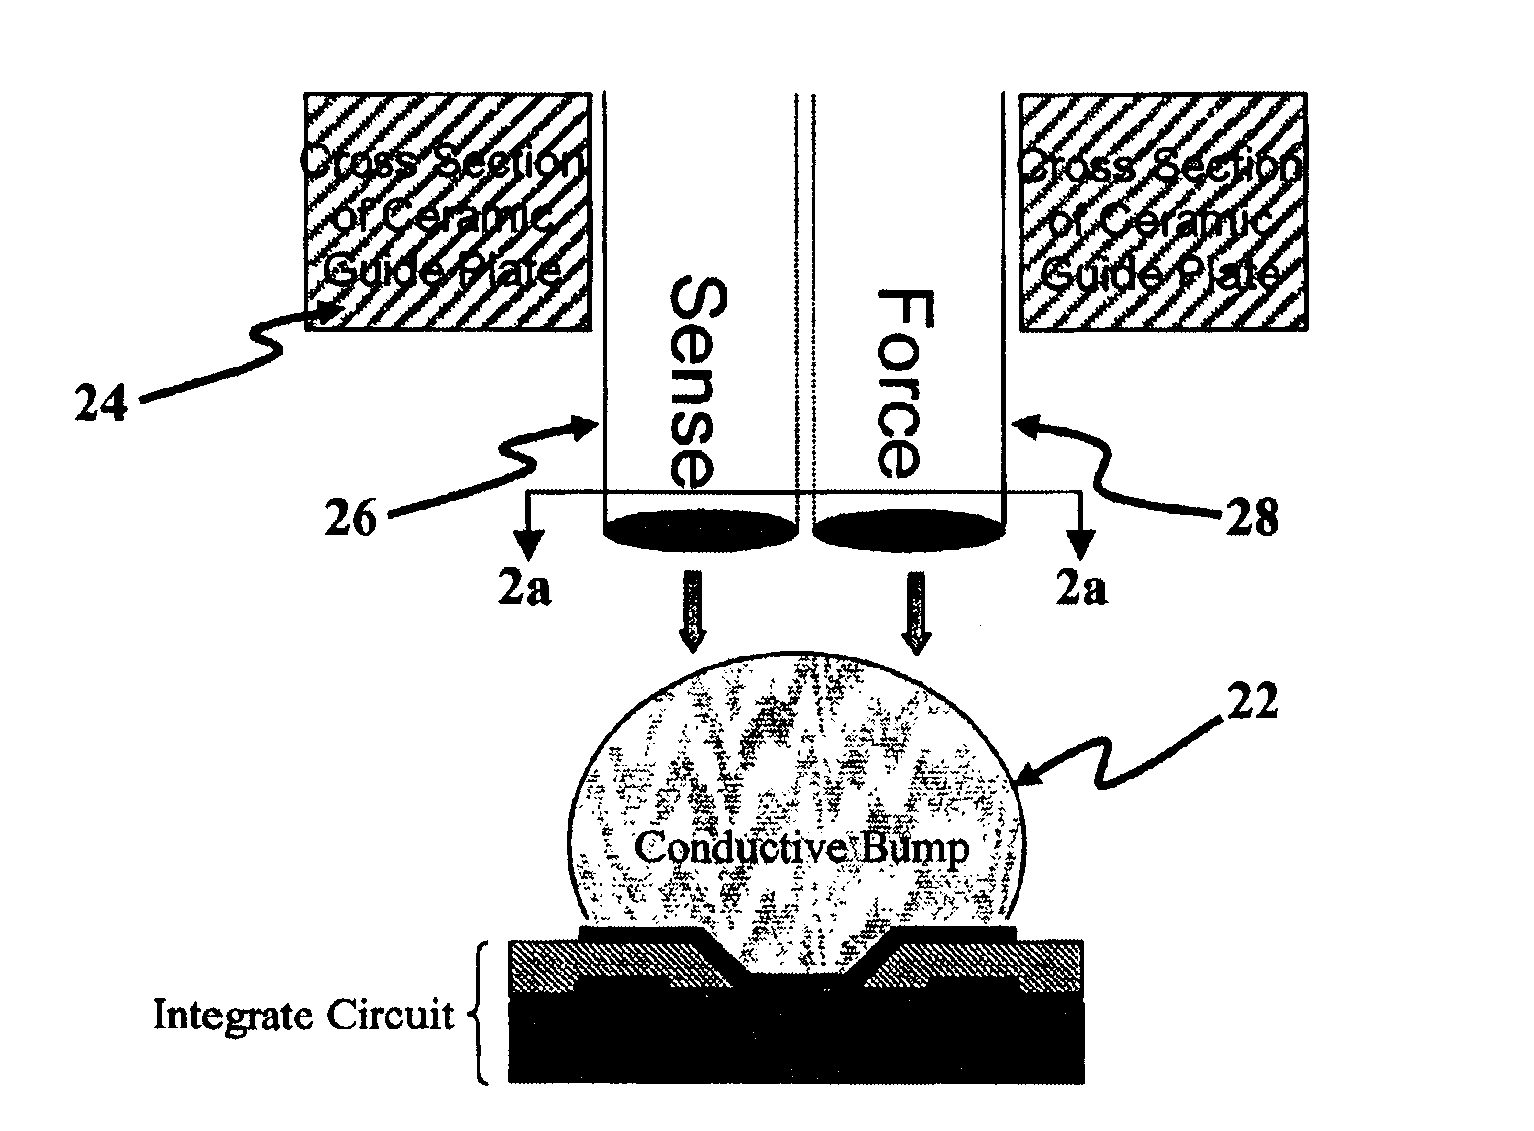 Multiple contact vertical probe solution enabling Kelvin connection benefits for conductive bump probing